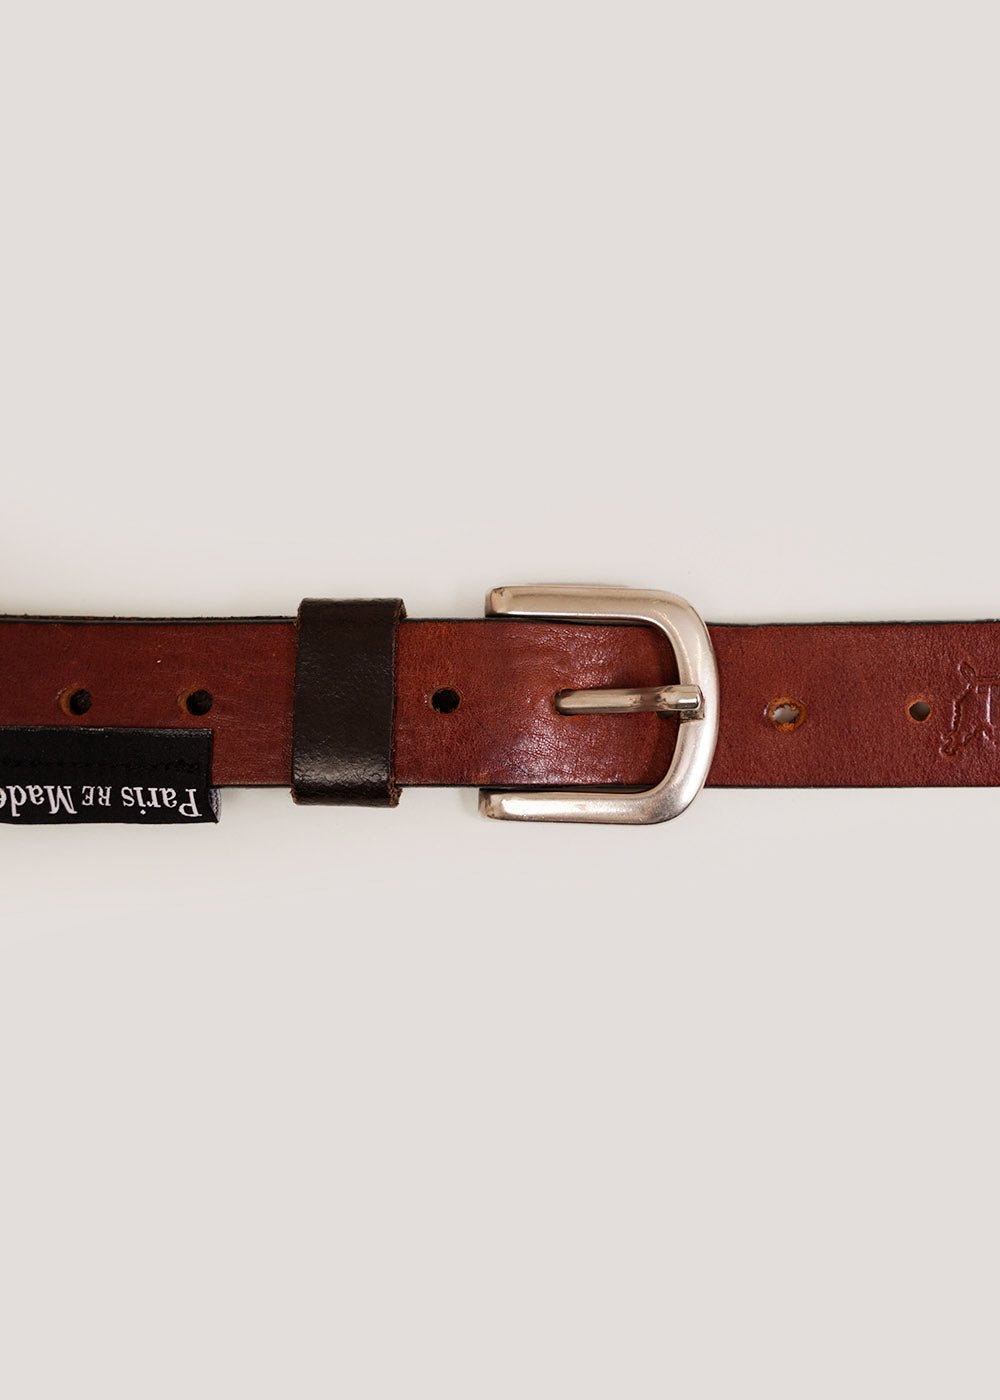 Paris RE Made Double Vintage Belt - New Classics Studios Sustainable Ethical Fashion Canada